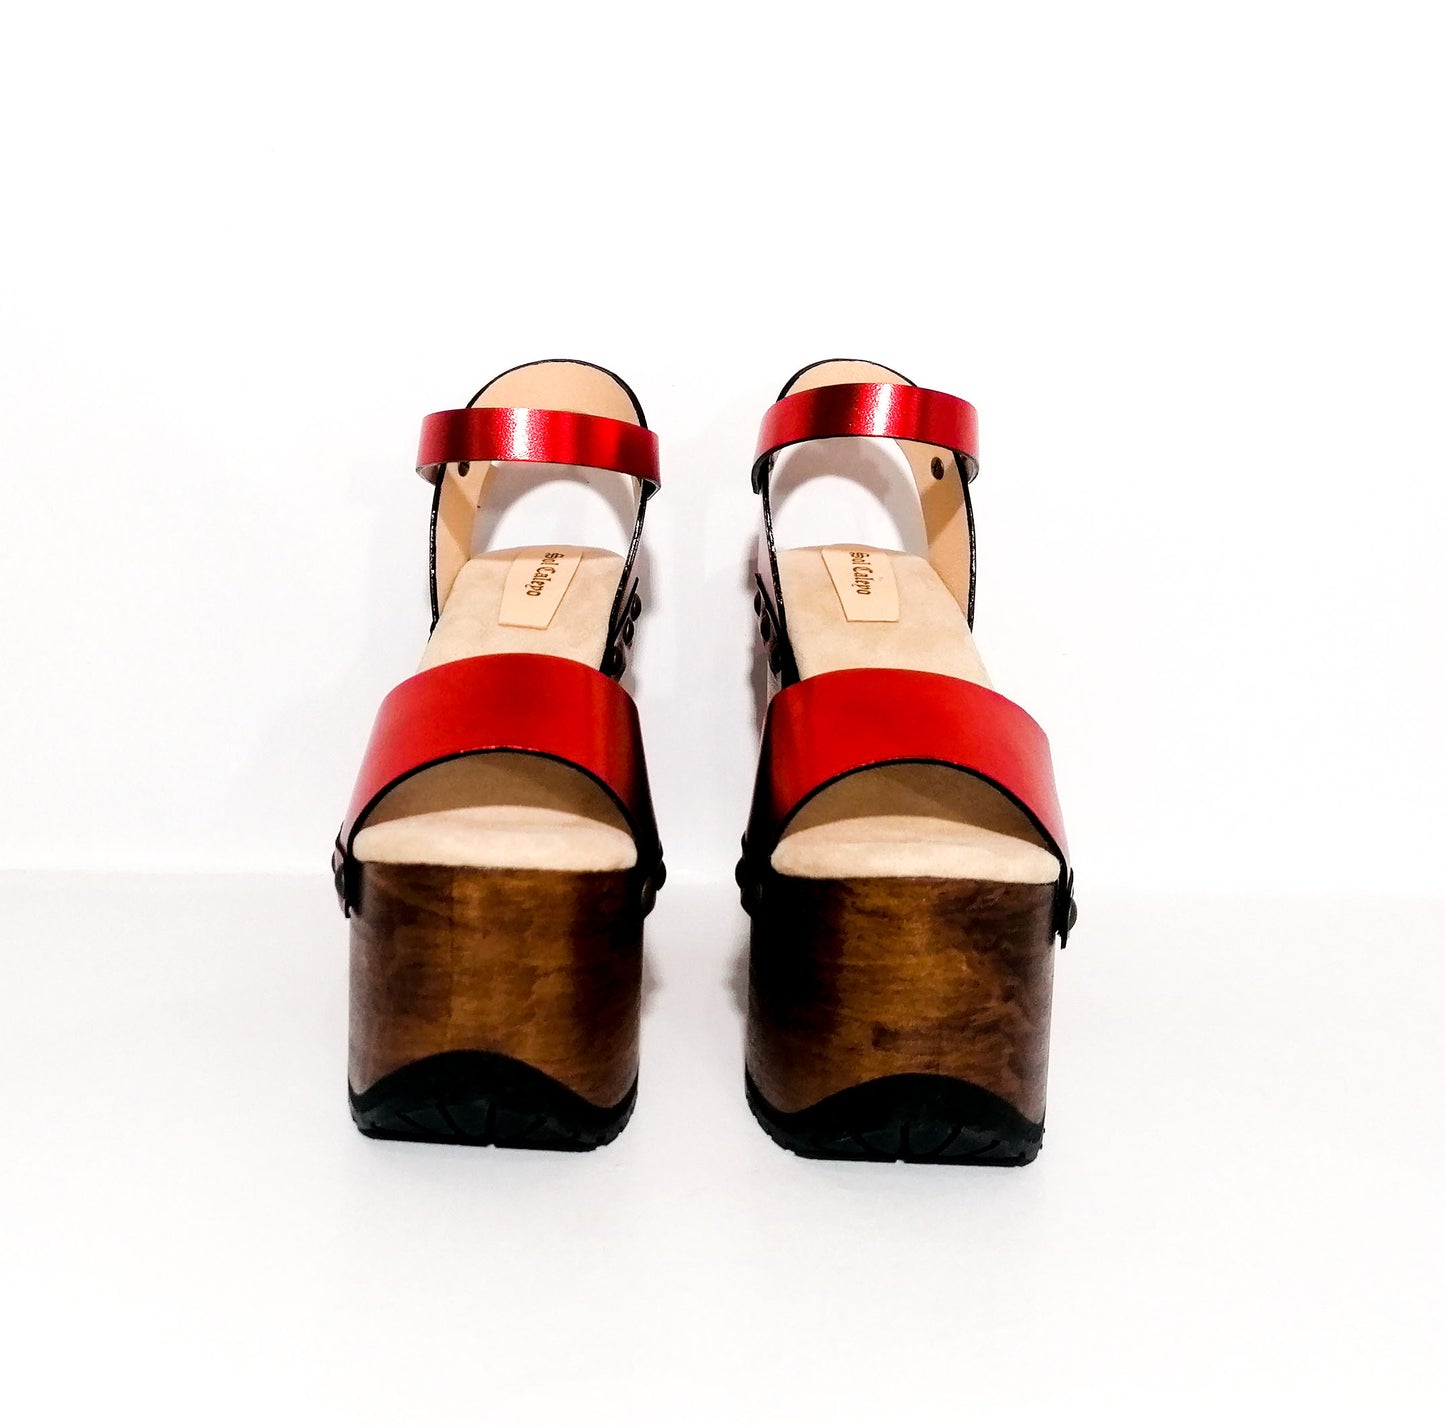 Vintage style red platform clog sandal. Super high wooden heel sandal. Vintage 70's style platform sandal. Sizes 34 to 47. High quality leather shoes handmade by sol Caleyo. Sustainable fashion.